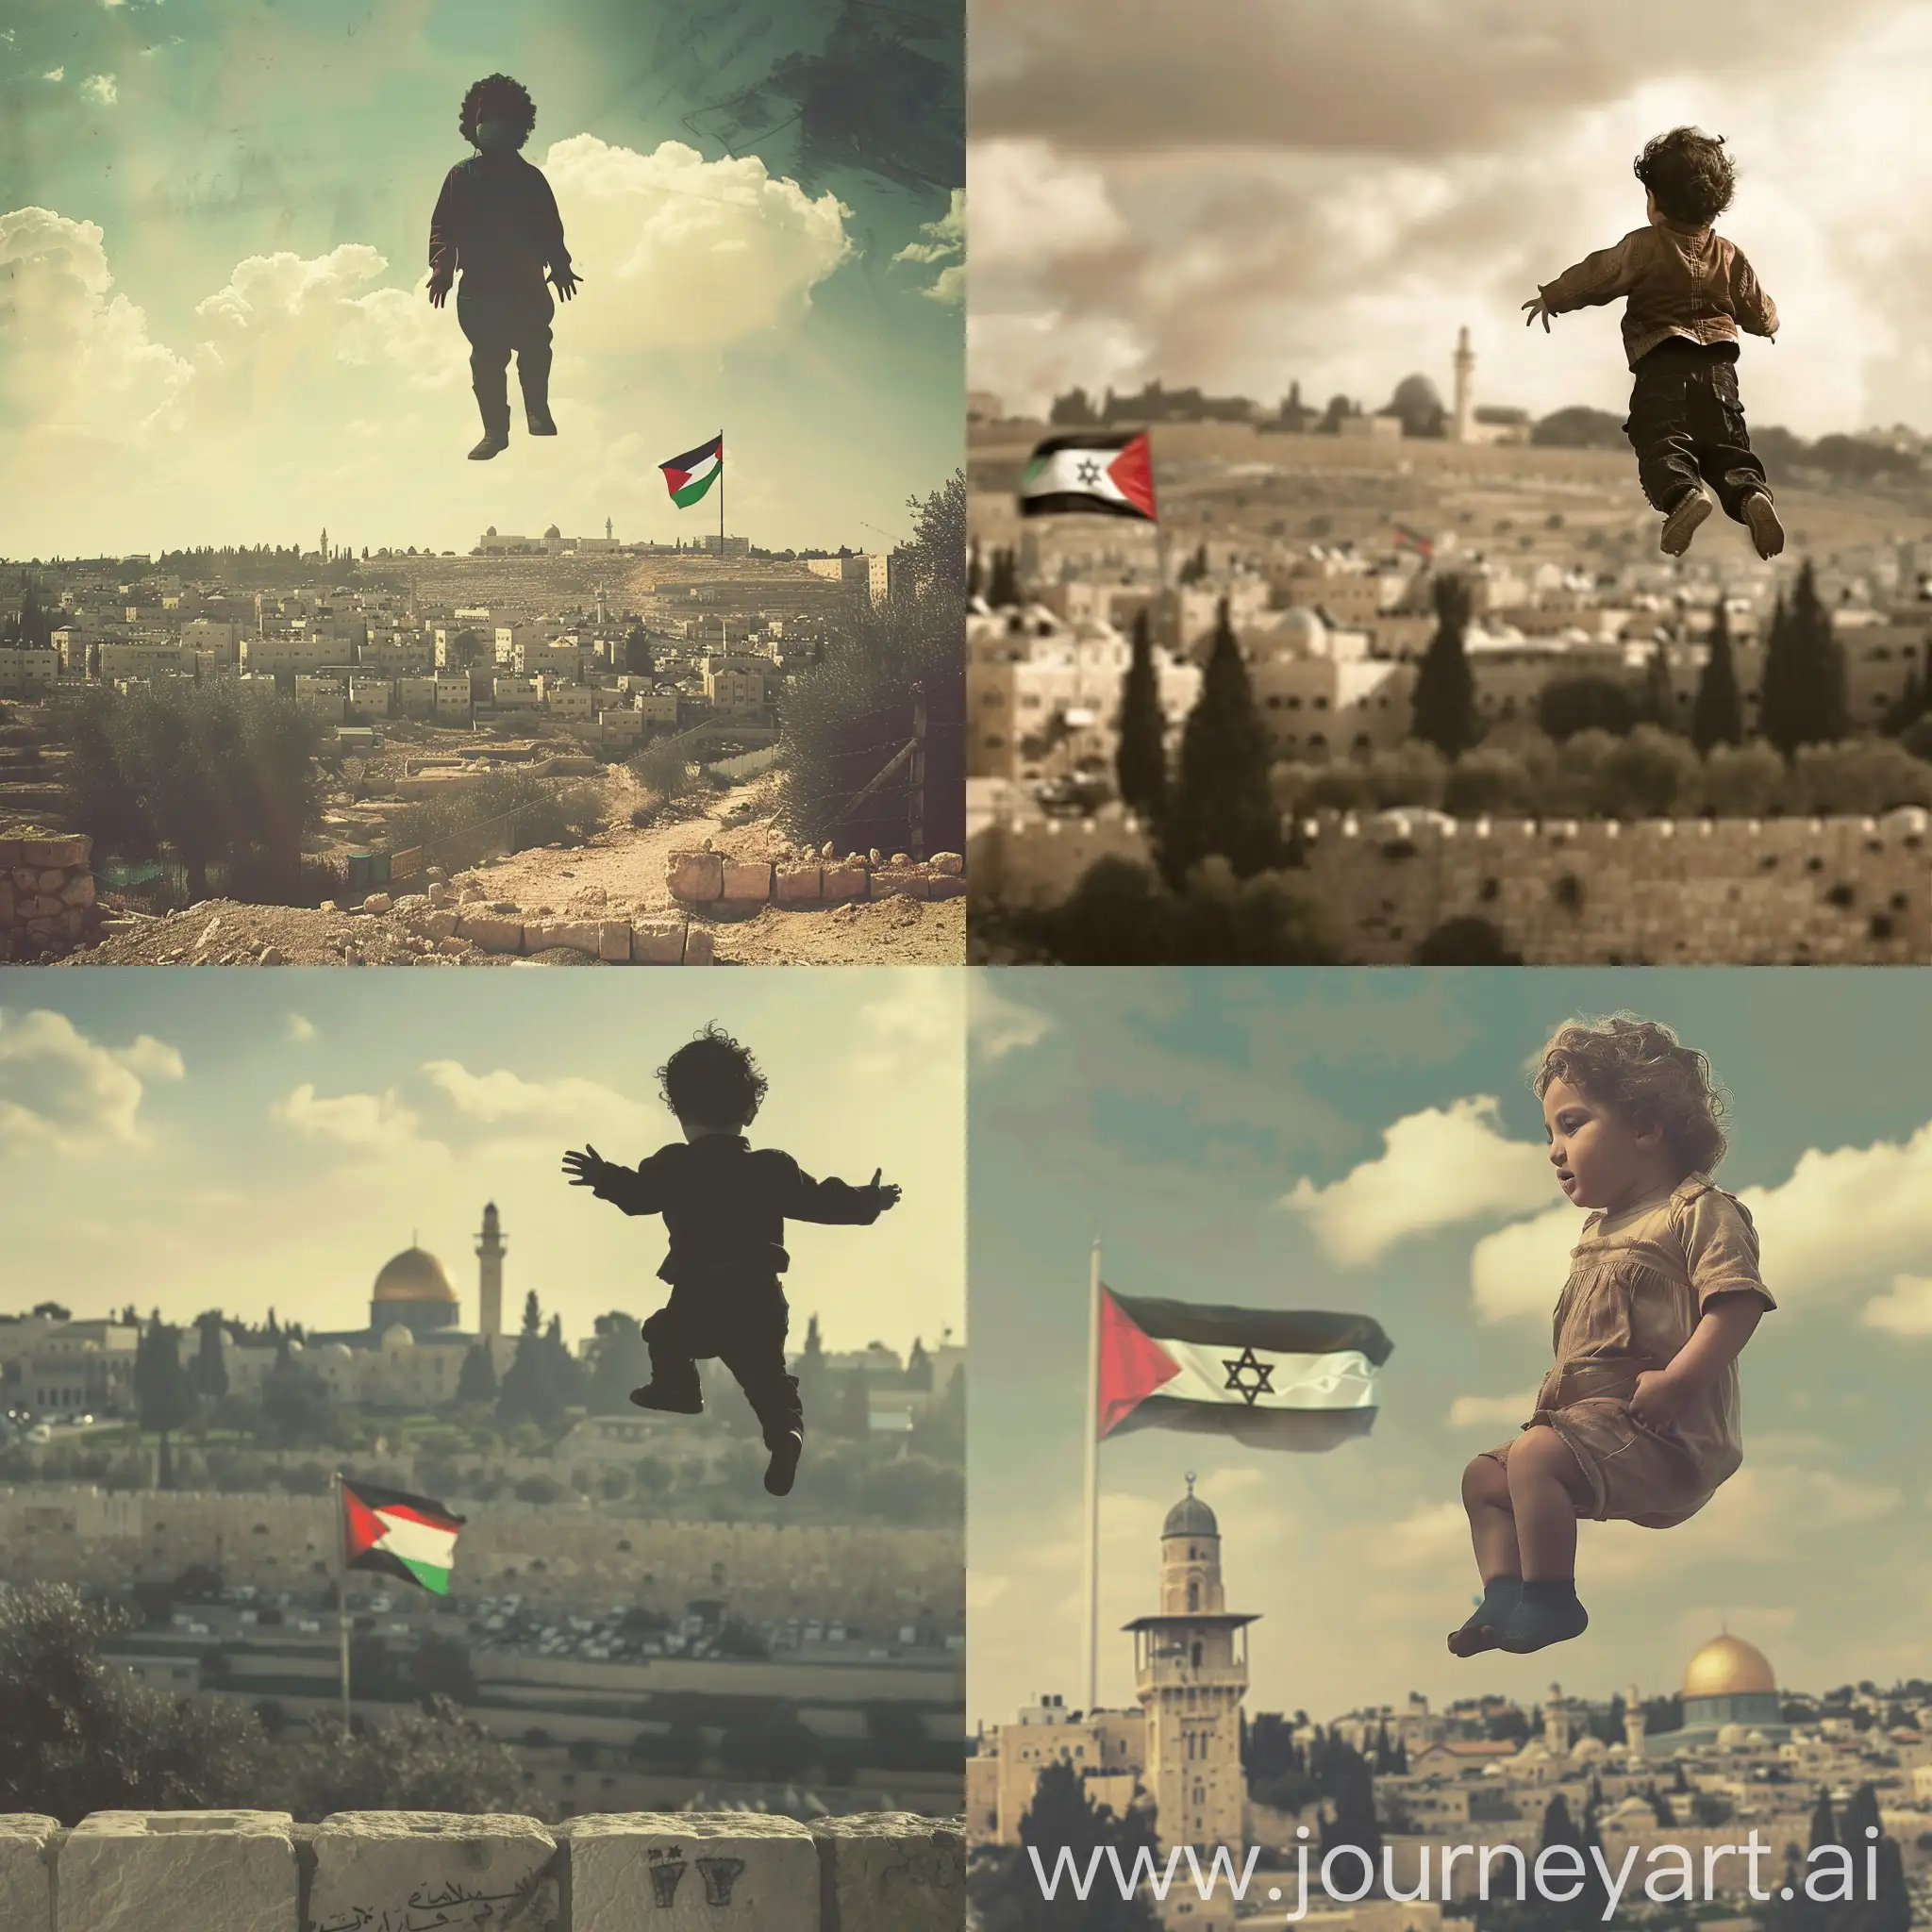 A philosophical photo of a Palestinian child flying to the sky after martyrdom, a view of Jerusalem and the Palestinian flag in the background.